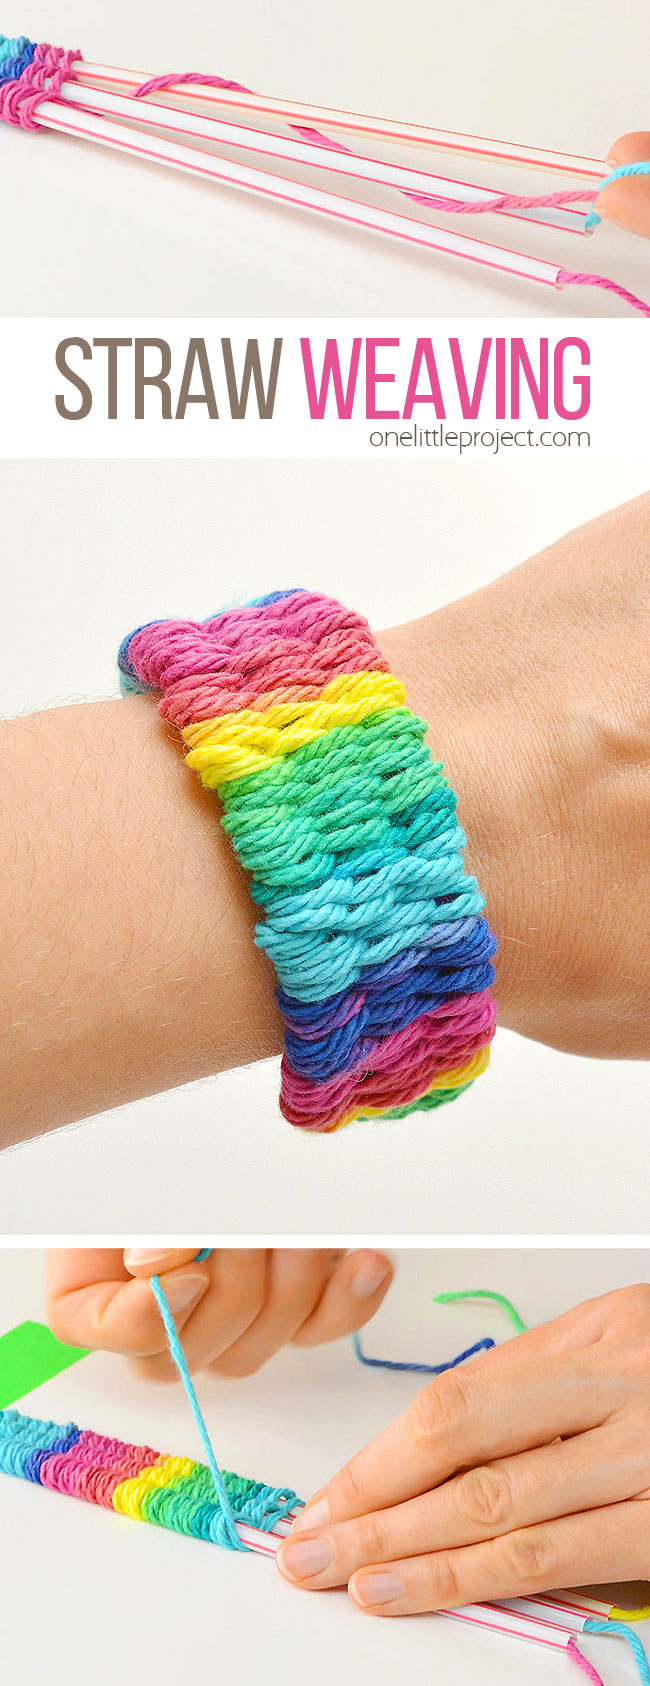 Straw weaving is such a fun craft idea! It's a great summer craft for camps and an awesome craft for kids or tweens. You can weave bracelets, necklaces, headbands and even belts. Wouldn't they make awesome friendship bracelets!? This method of weaving is easy to learn and it's lots of fun!